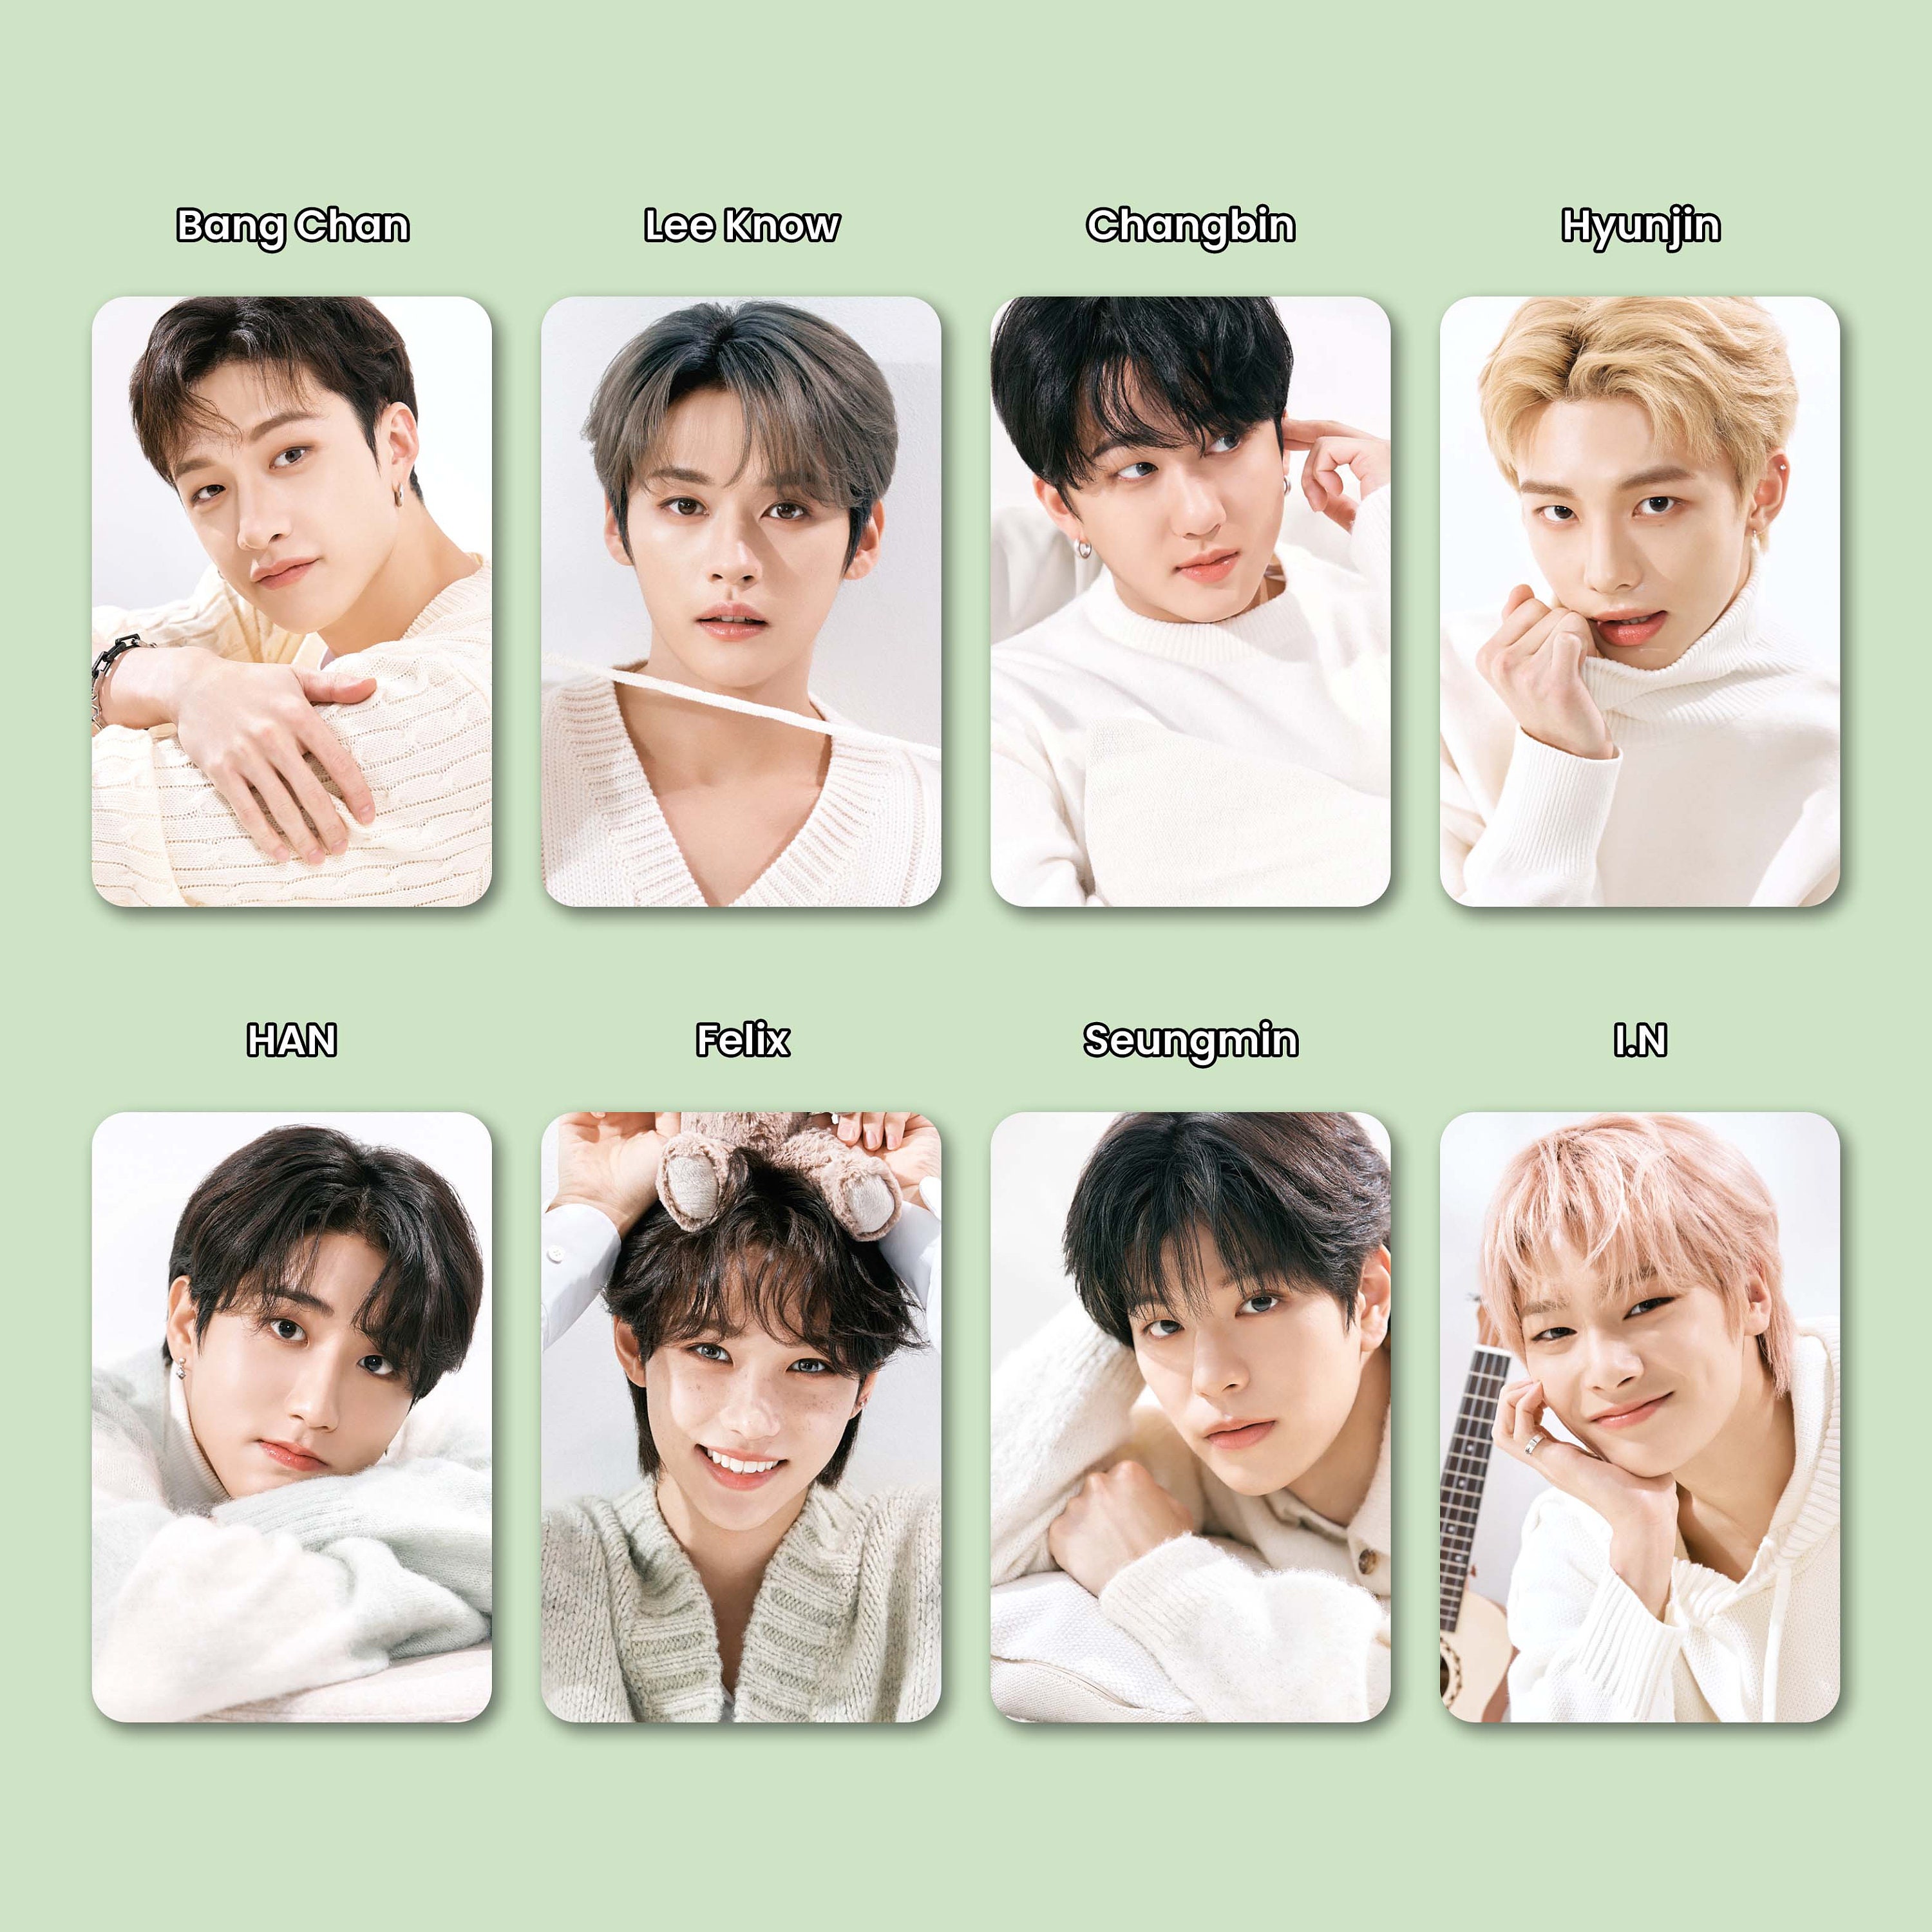 Stray Kids Photocard Set Finding SKZ 3 Episode 3 Fanmade Lomo OT8 Perfect  Gift for STAY Friends, Daughter Matte -  México